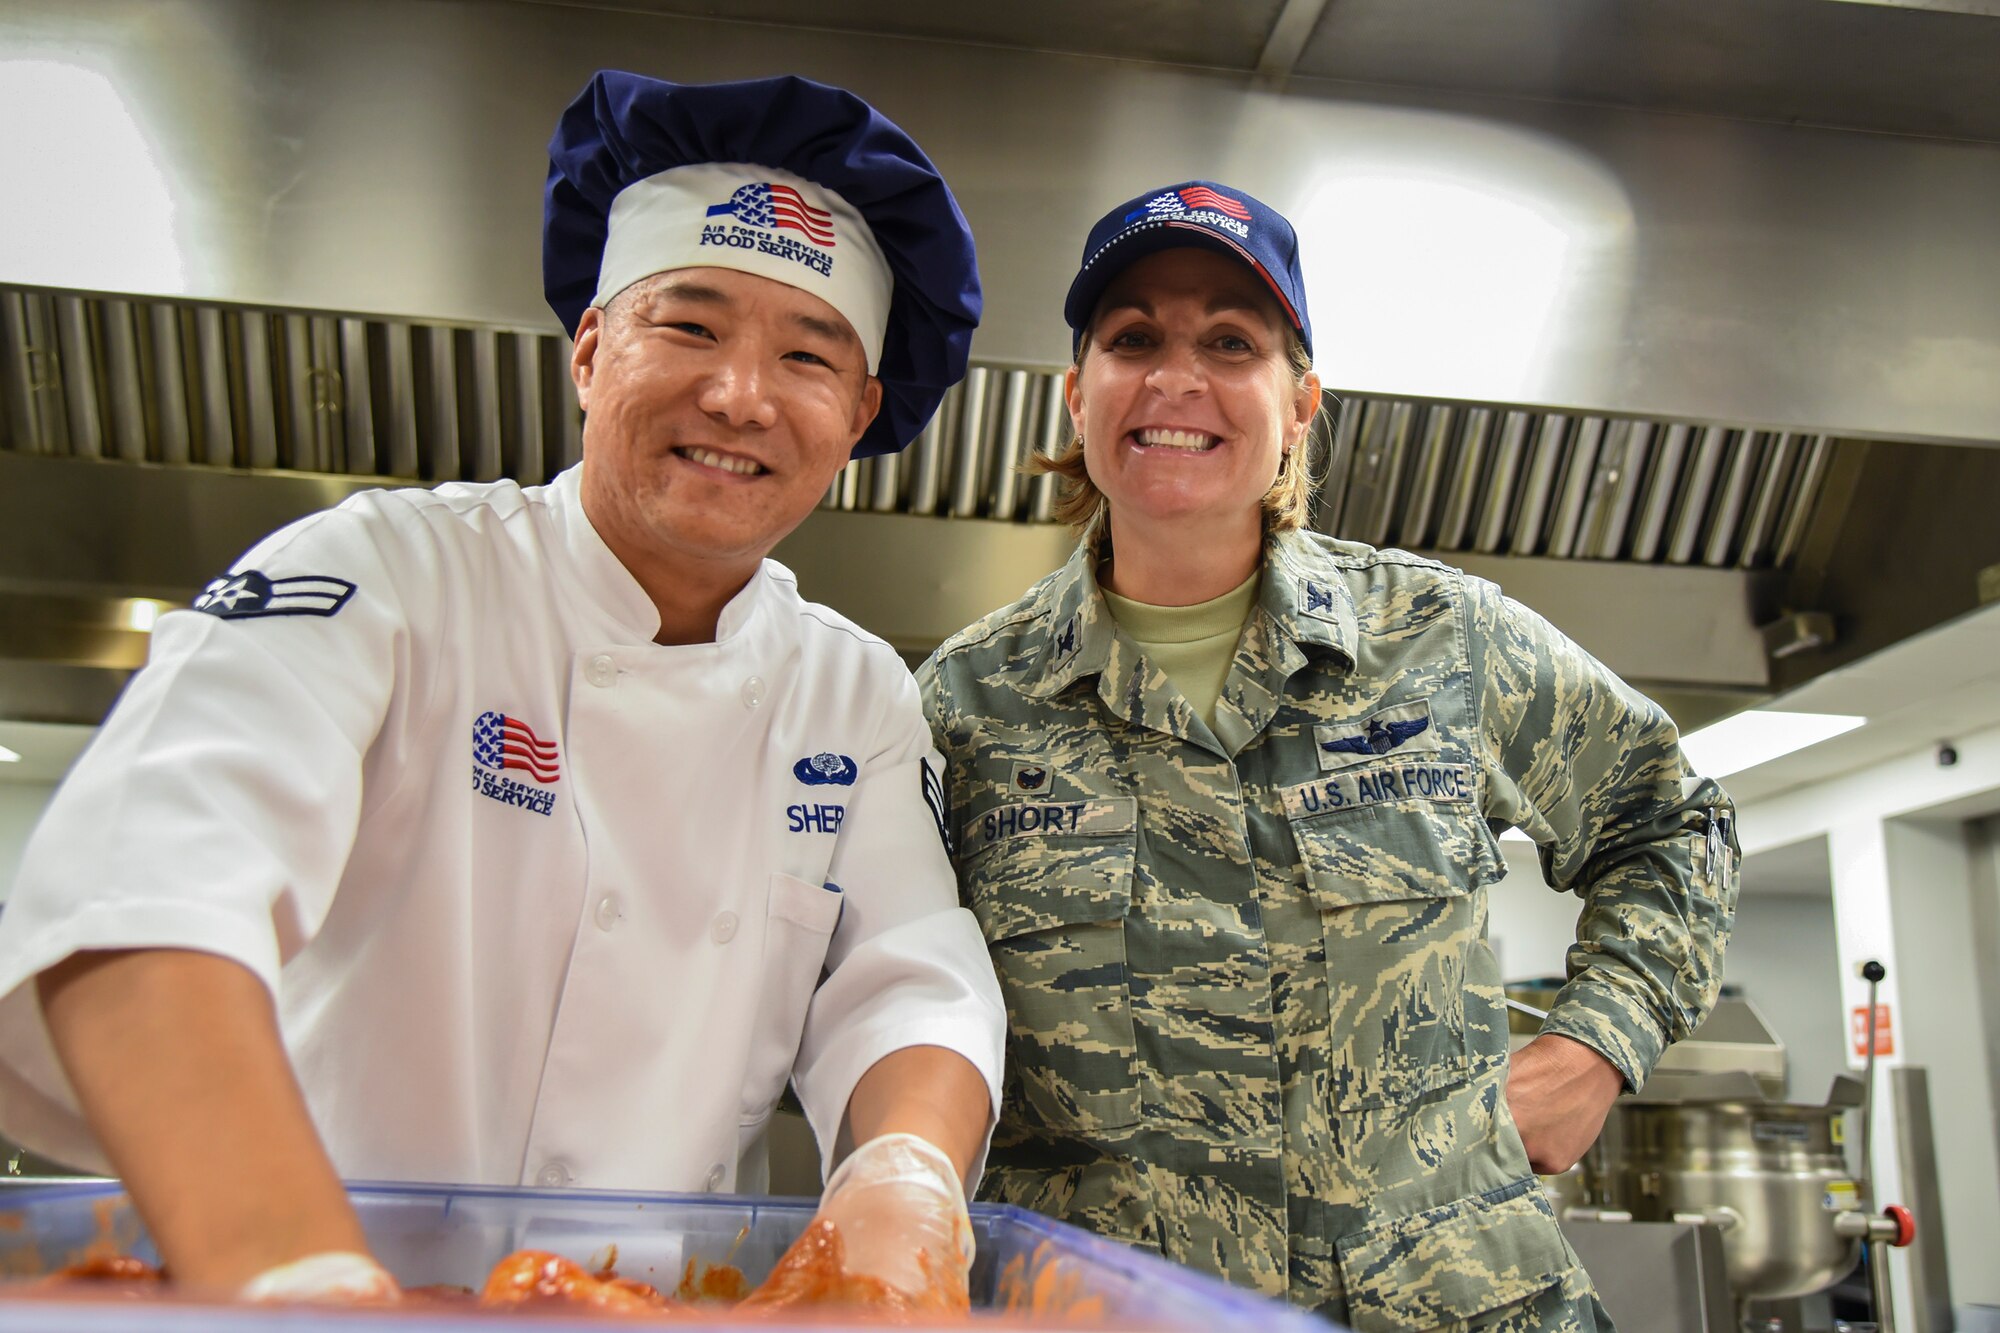 Airman 1st Class Pema Sherpa, left, 23d Force Support Squadron services journeyman, and Col. Jennifer Short, 23d Wing (WG) commander, pose for a photo during an immersion tour, June 11, 2018, at Moody Air Force Base, Ga. Short and Chief Master Sgt James Allen, 23d WG command chief, toured the Georgia Pines Dining Facility and the Information Learning Center to gain a better understanding of their overall mission, capabilities and comprehensive duties. (U.S. Air Force photo by Airman 1st Class Eugene Oliver)